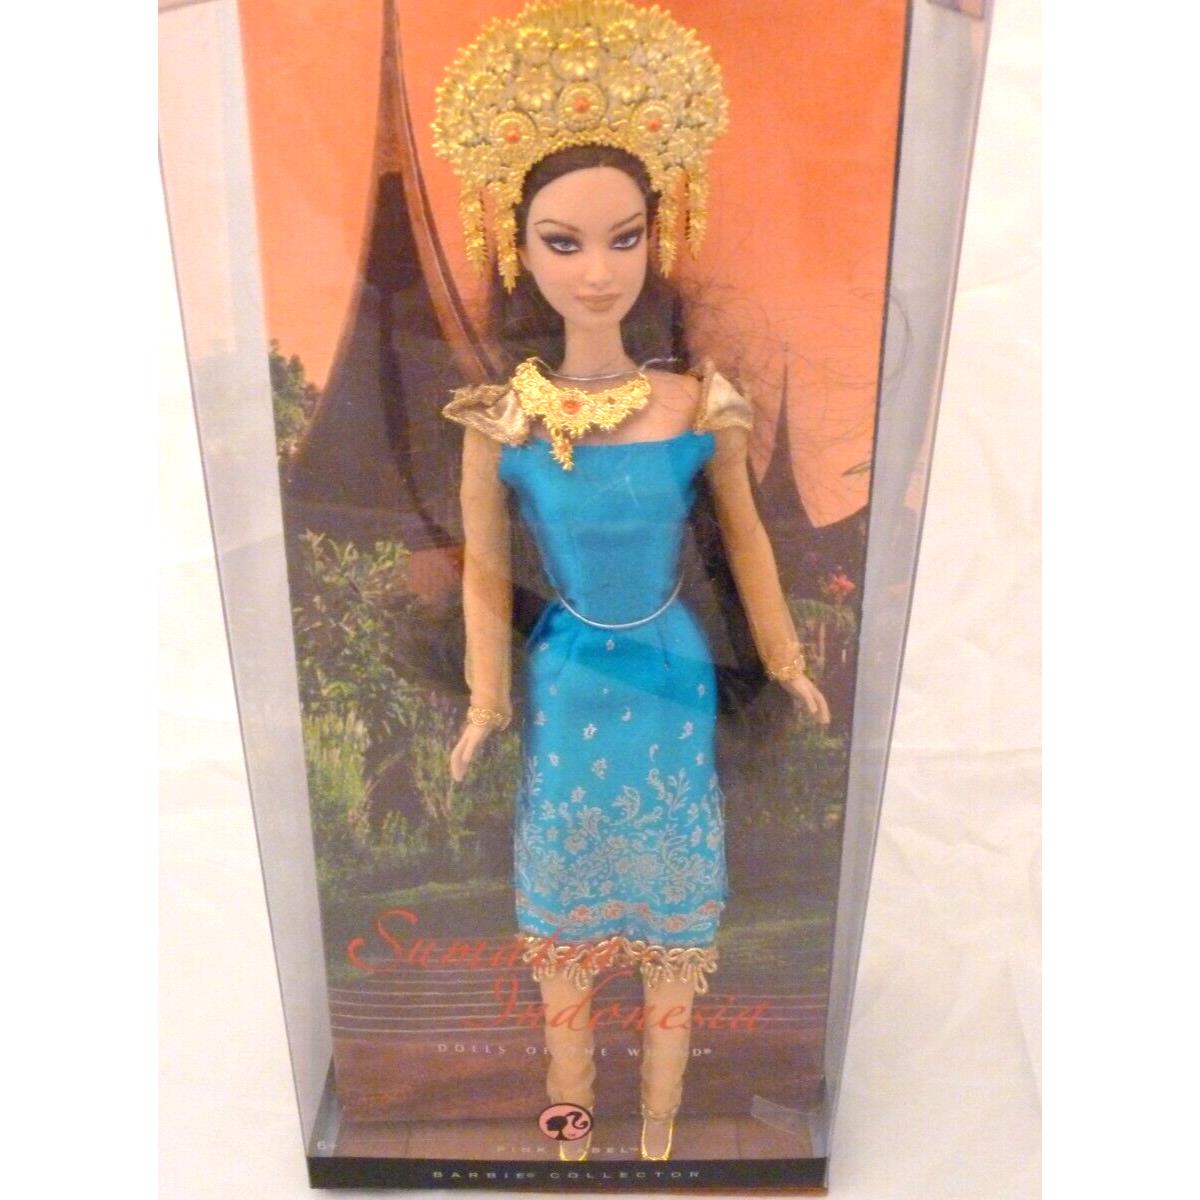 2007 Sumatra Indonesia Barbie Dolls of The World Pink Label Barbie Collector